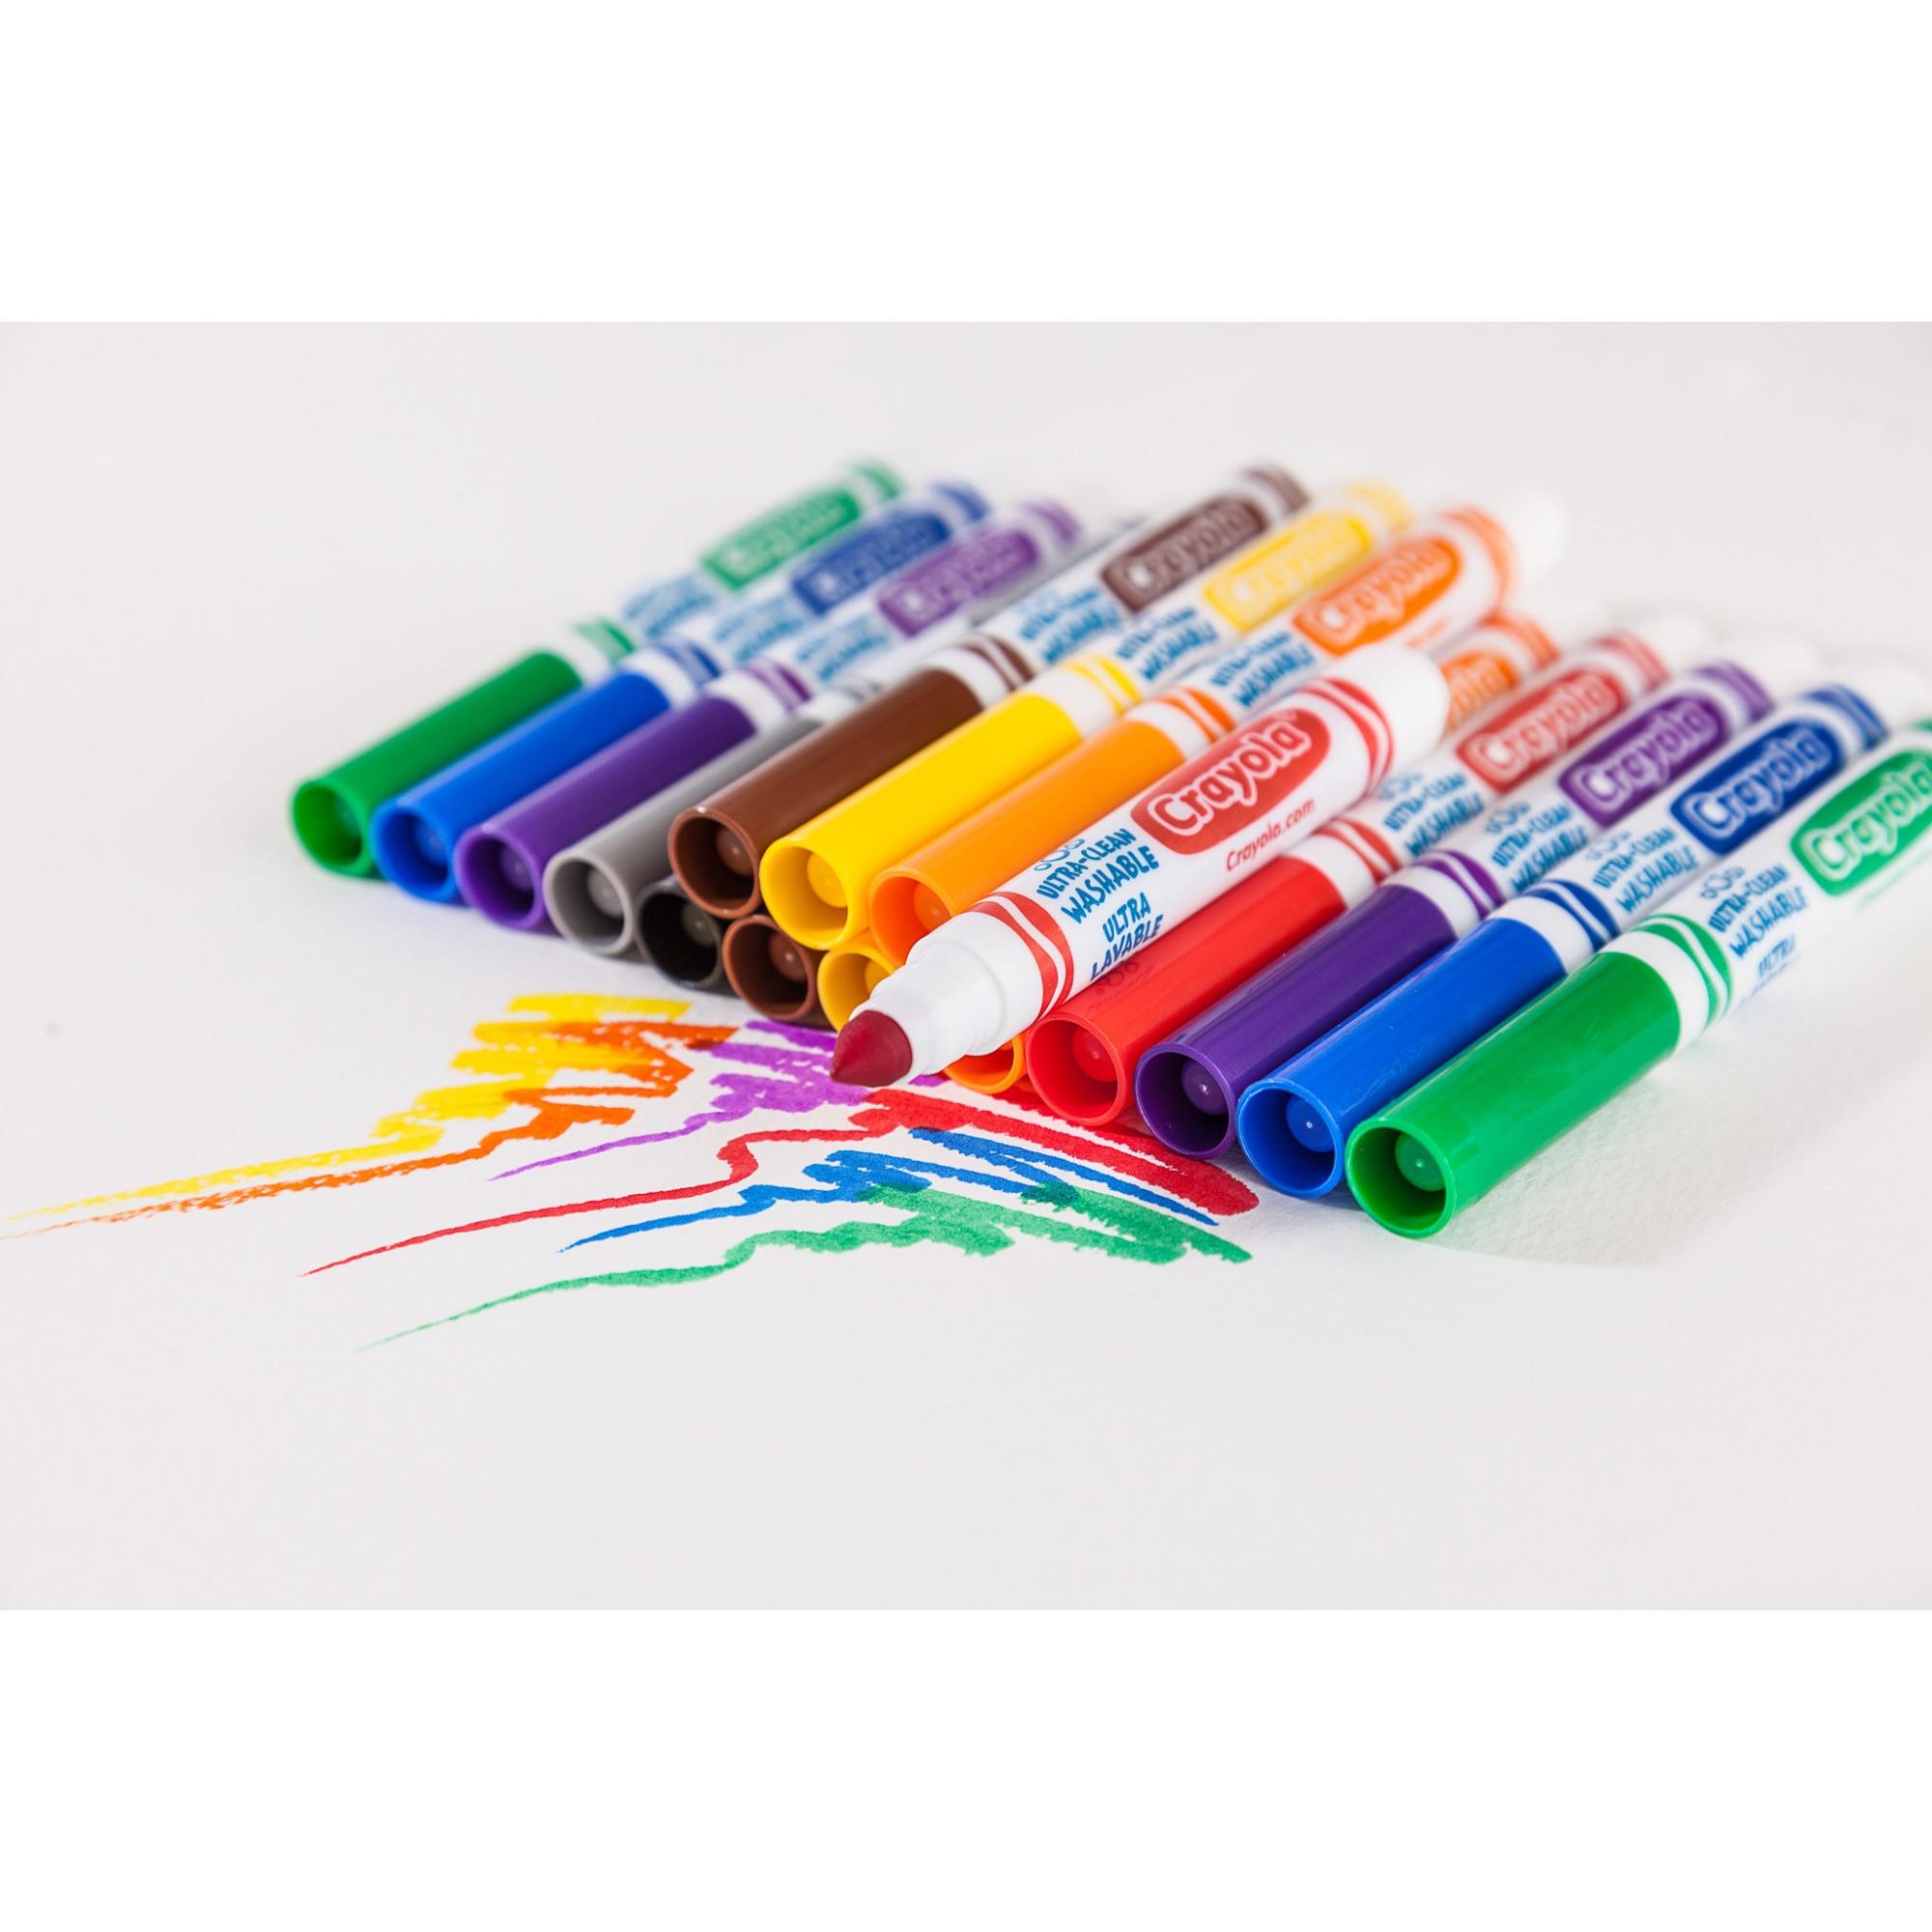 Crayola Ultra-Clean Washable Broad Line Markers, School & Art Supplies, 10 Ct - image 4 of 9